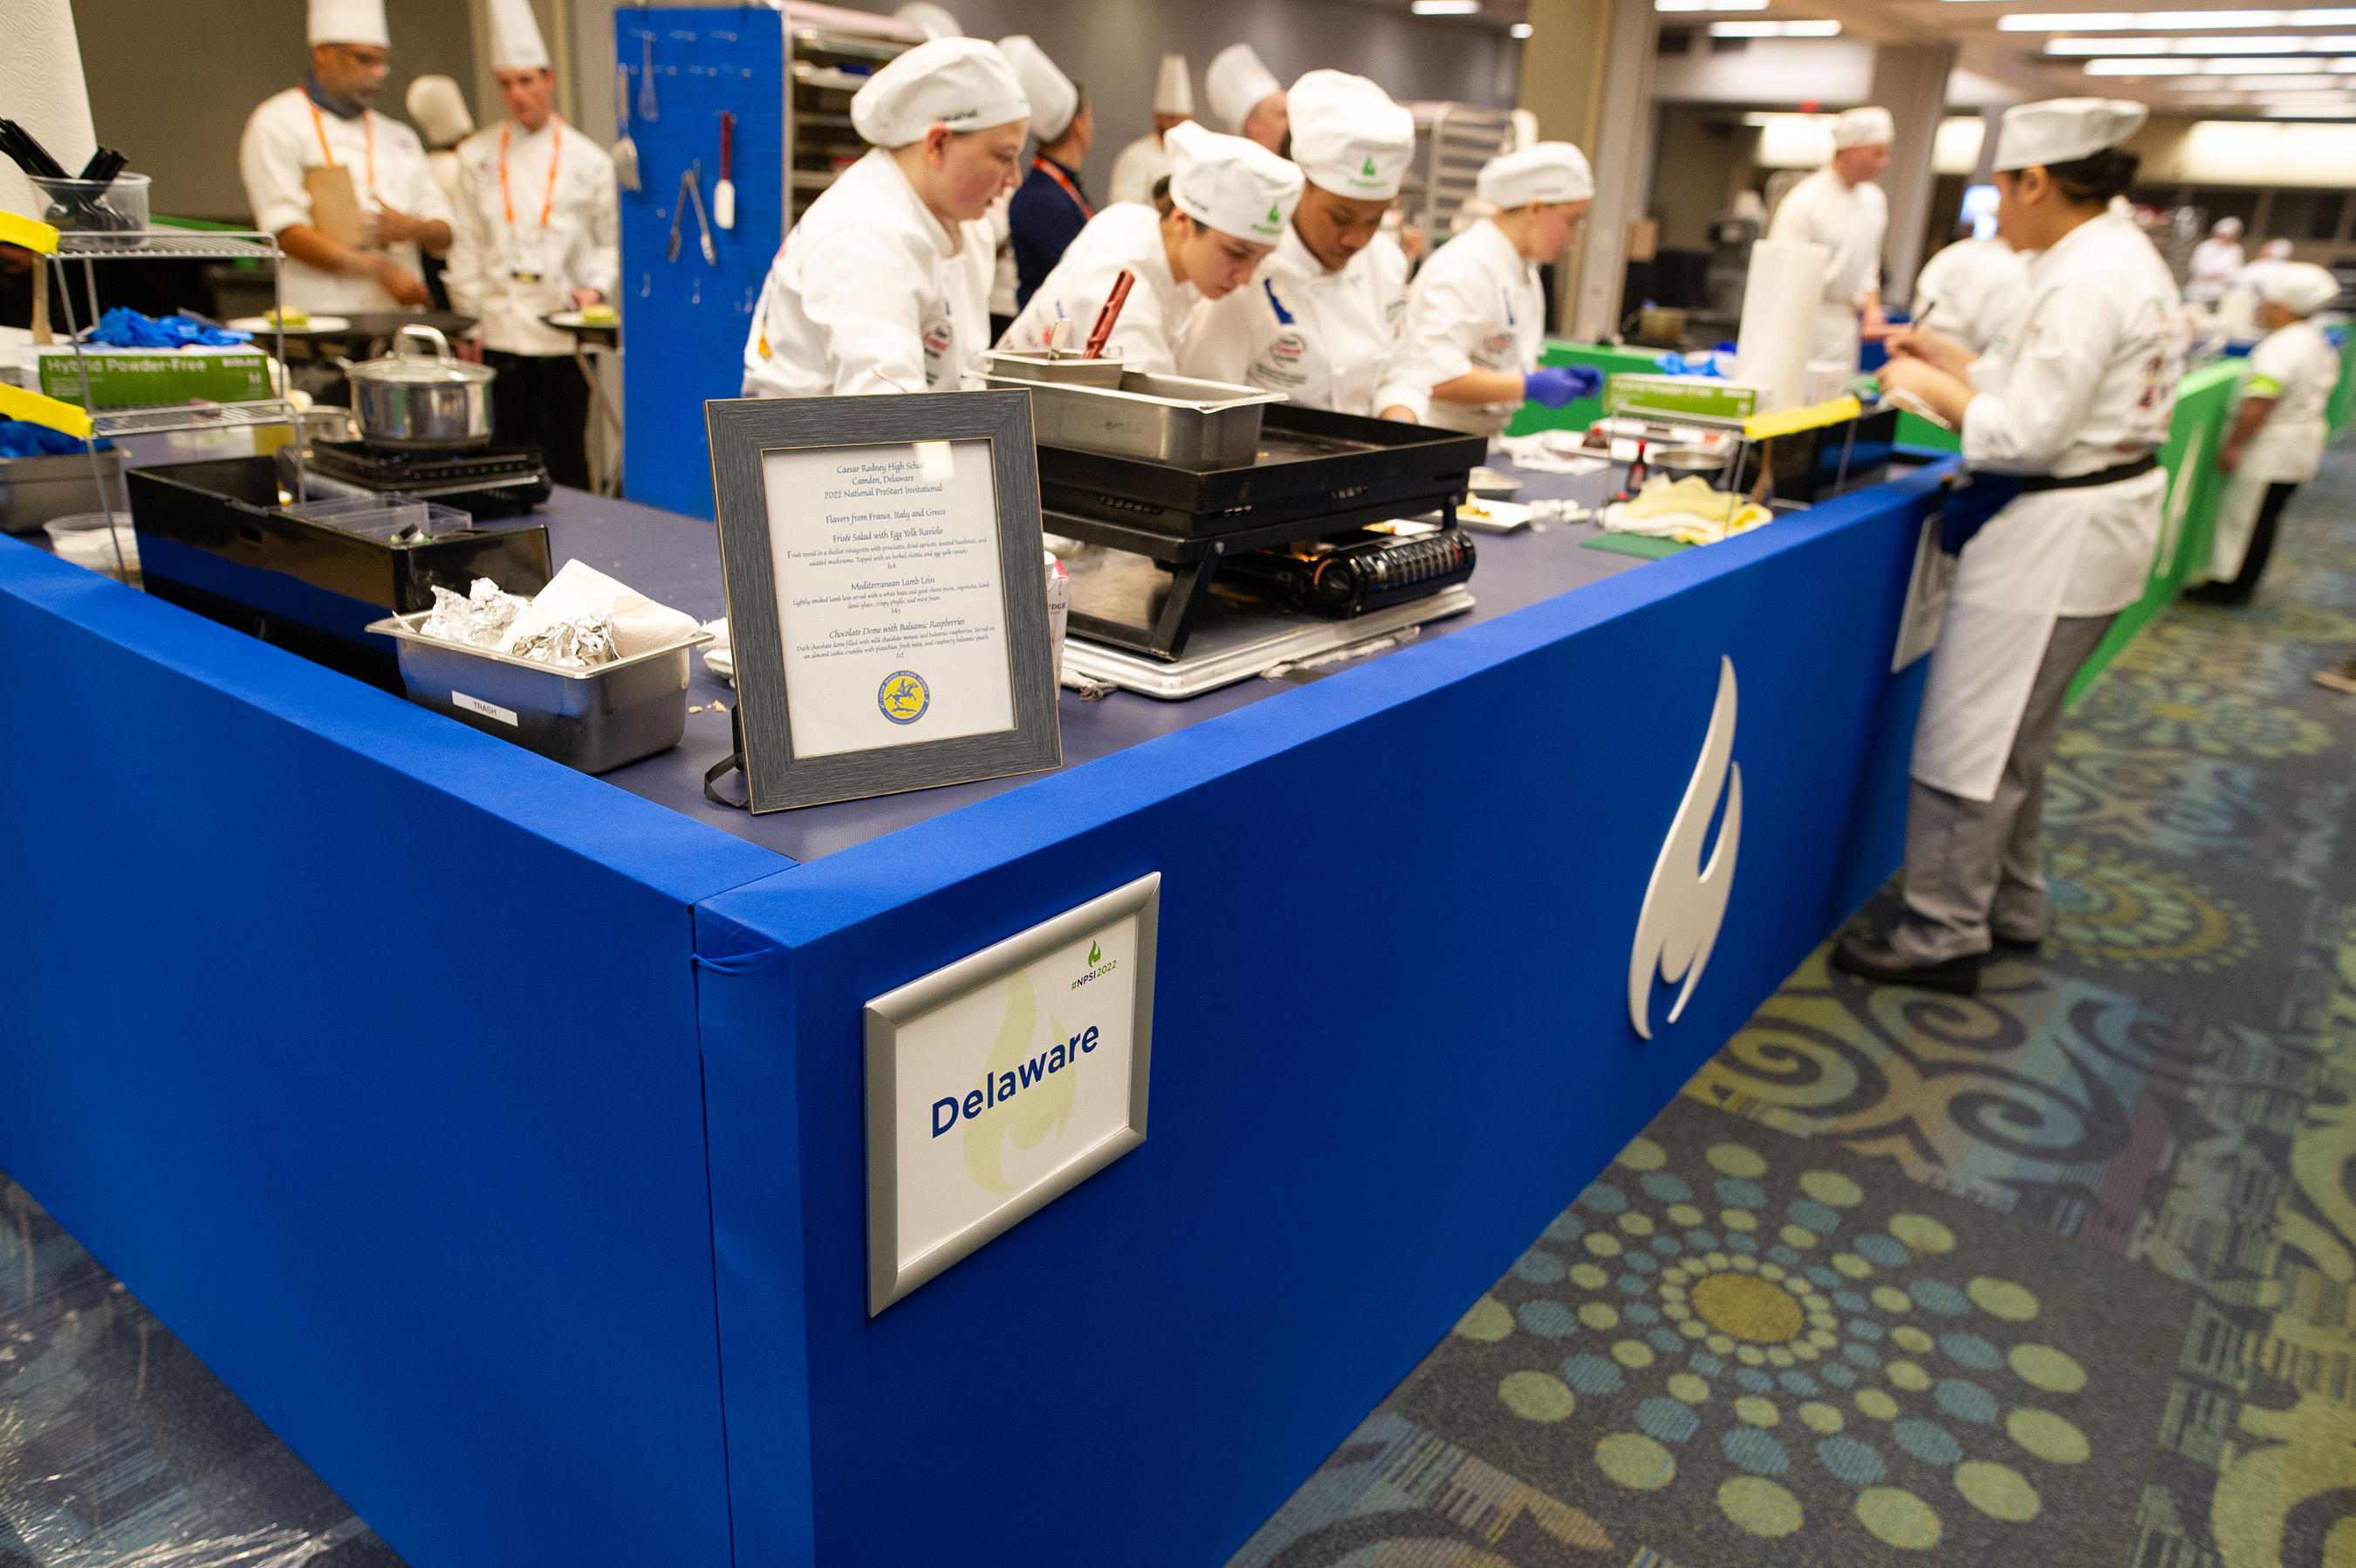 The 2022 National ProStart Invitational featured 80 teams across culinary arts and restaurant management competitions.